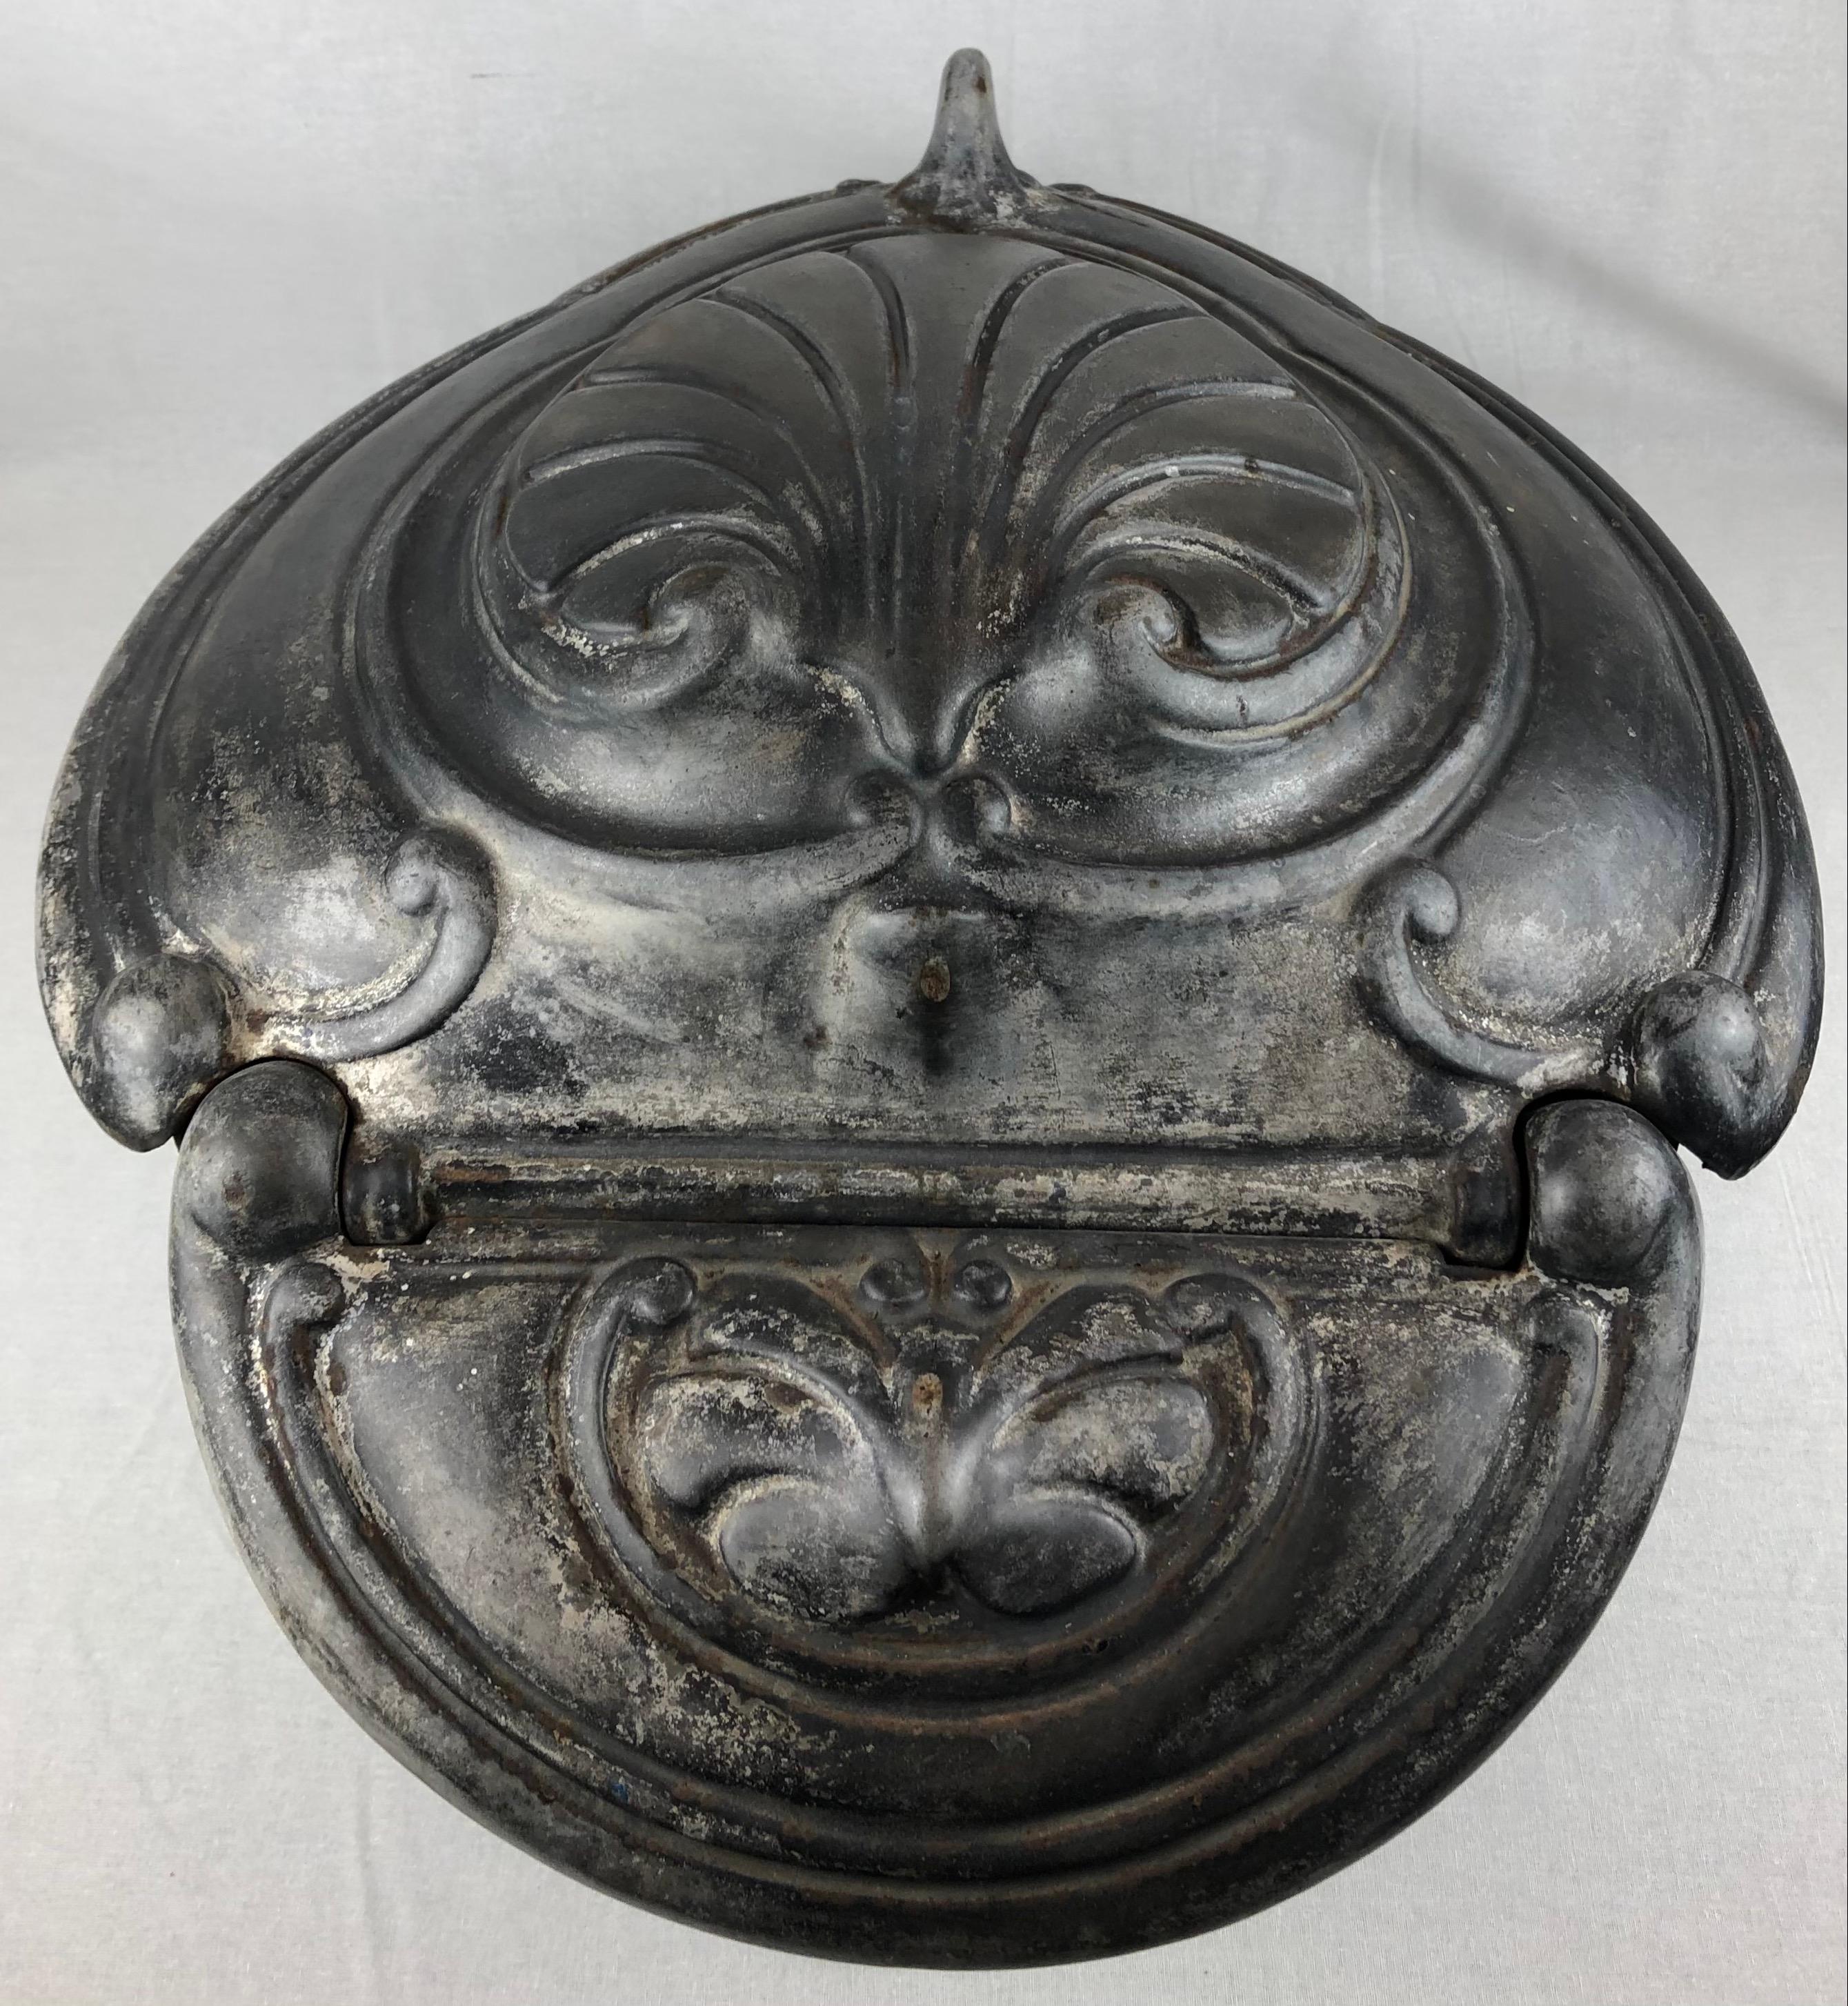 A completely original 19th century French polished cast iron fire basket grate in the Rococo style. 

A shaped high back complete with its original fire stone, with a four bar serpentine polished grate front topped by polished flame finials, and